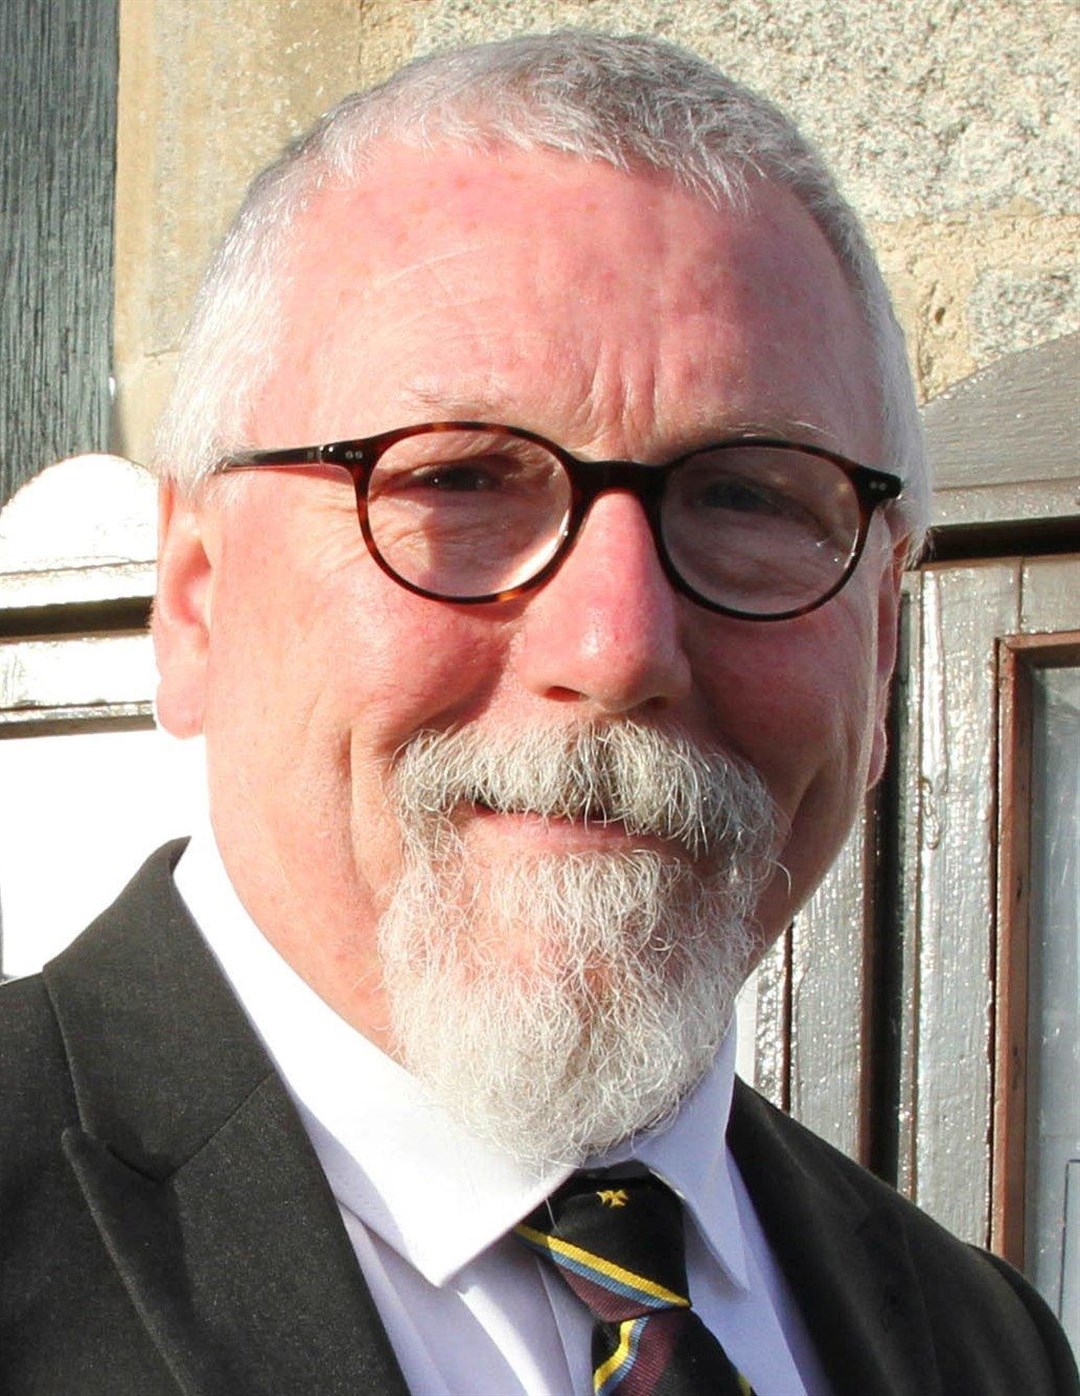 Reverend Charles Finnie, a member of the fund's steering group.